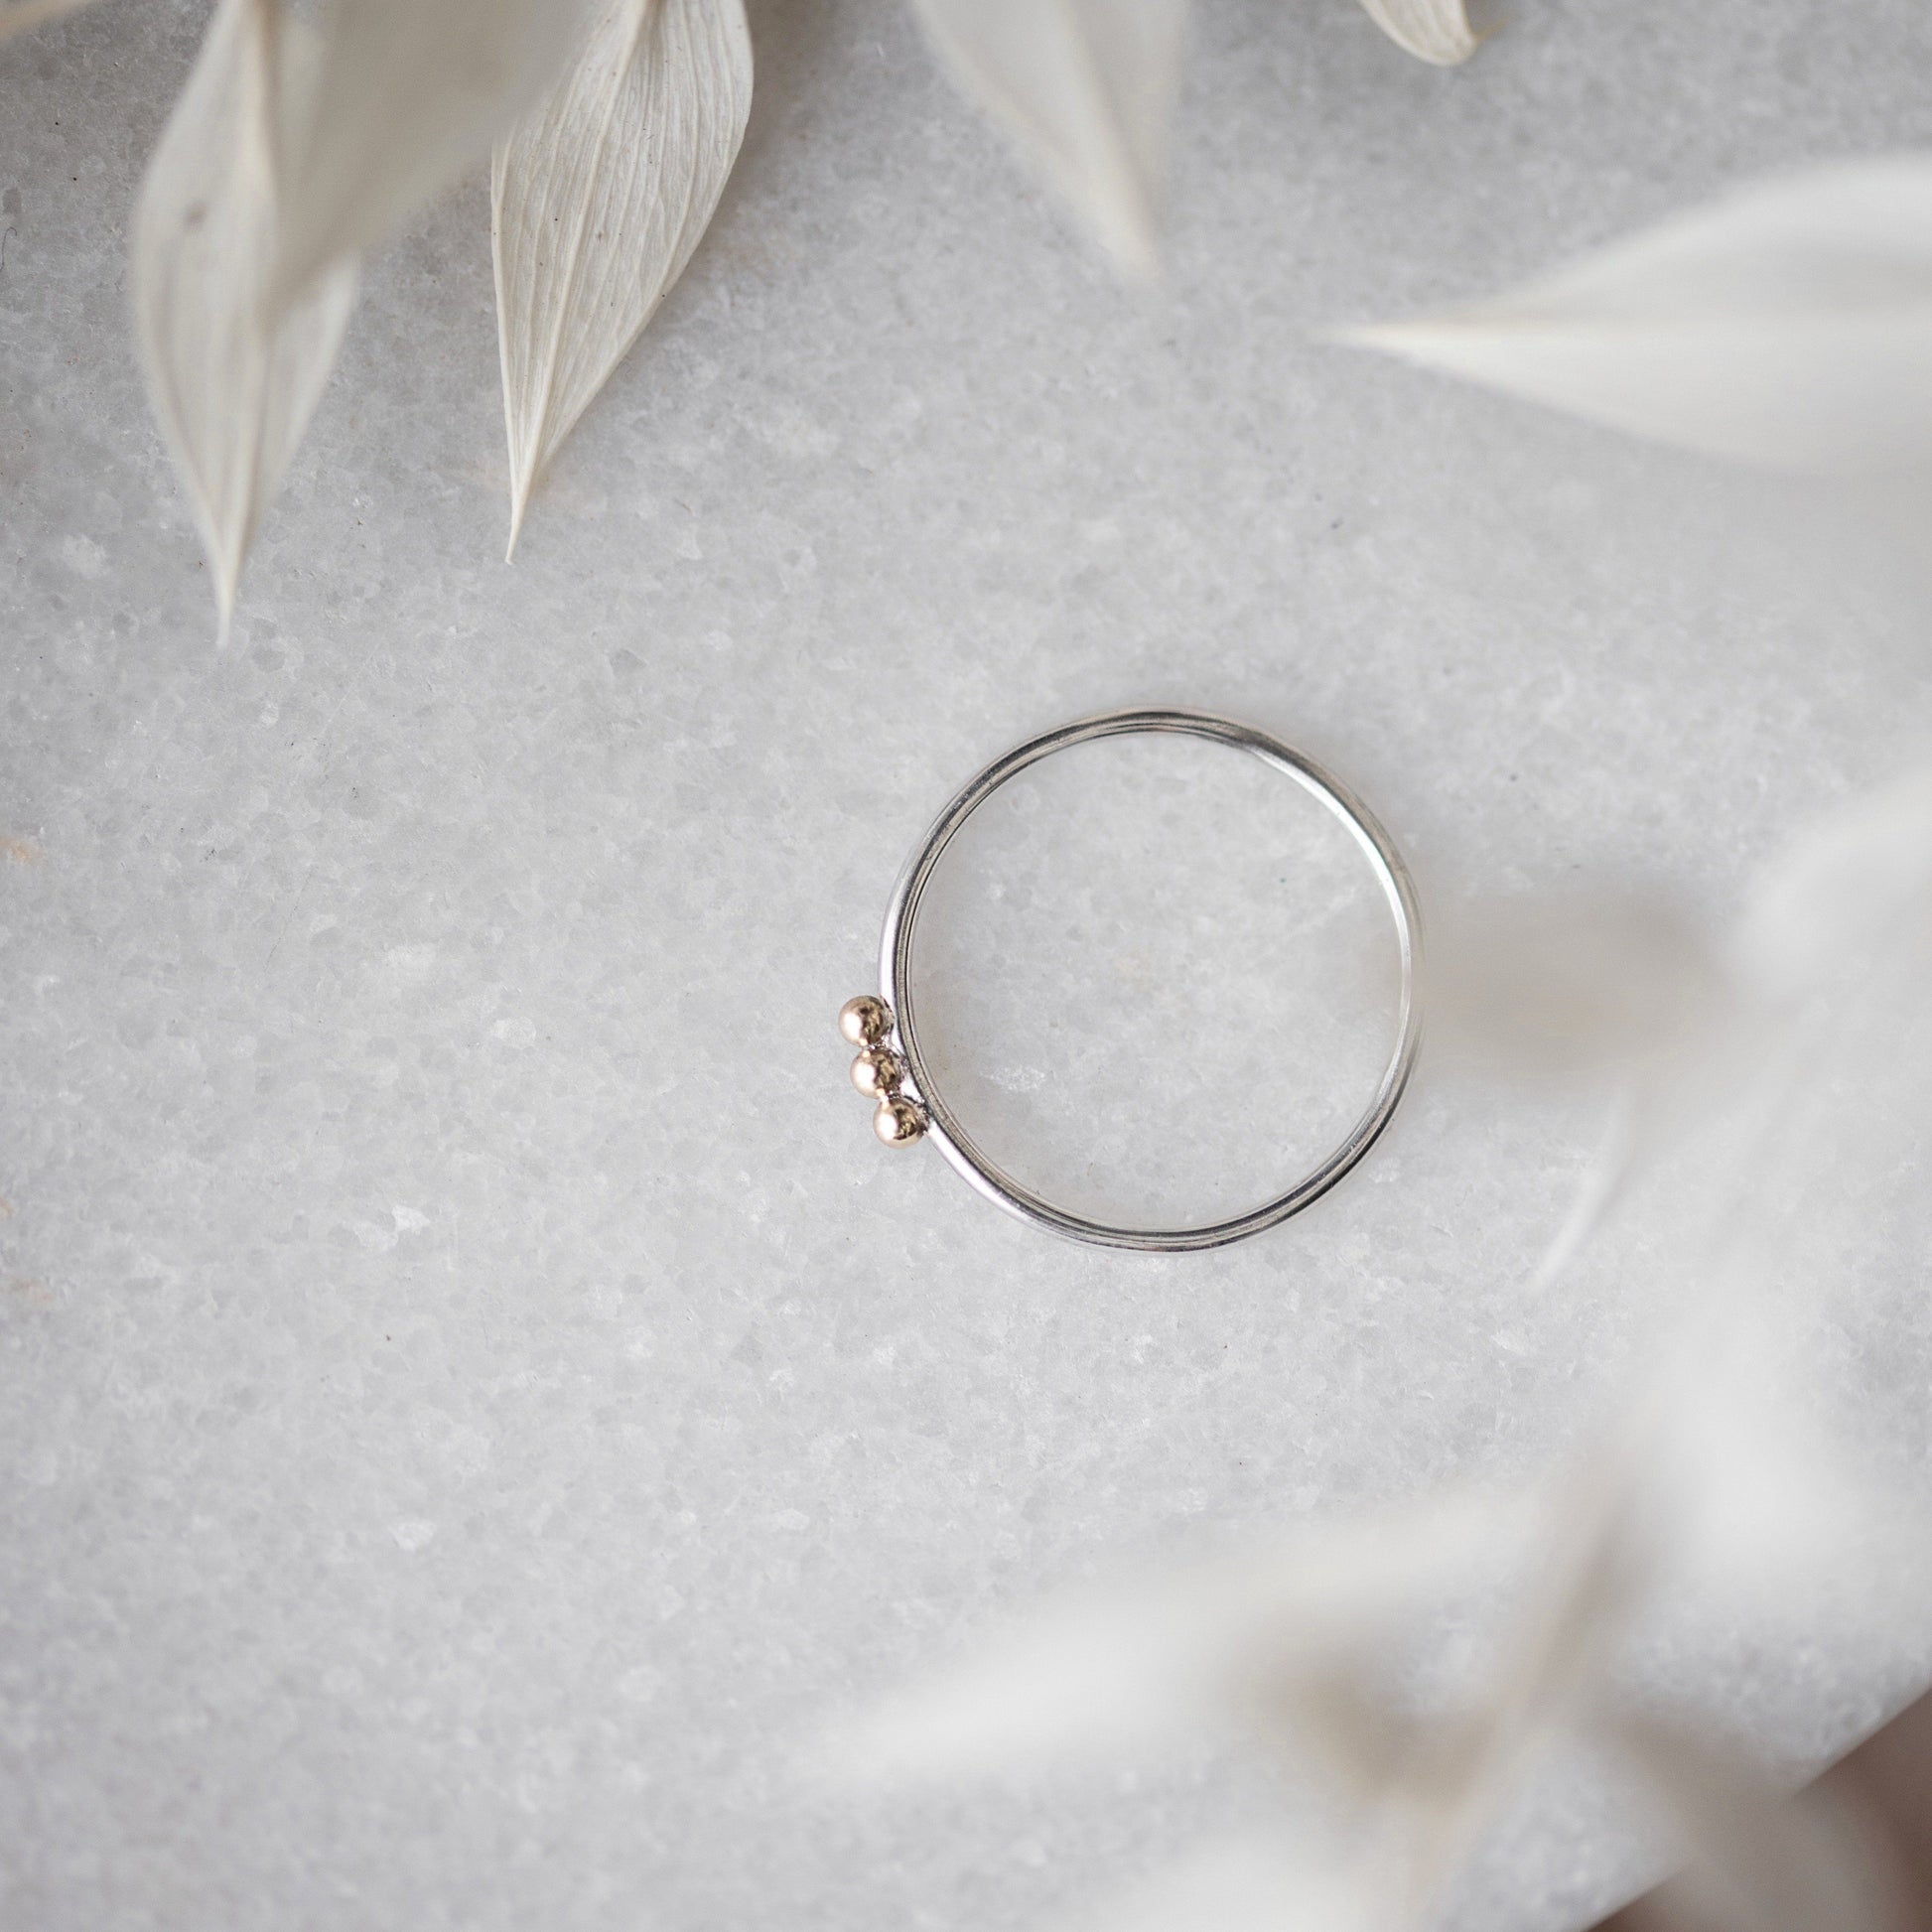 Gold and Silver Stacking Ring - handmade silver jewellery by Anna Calvert Jewellery in the UK